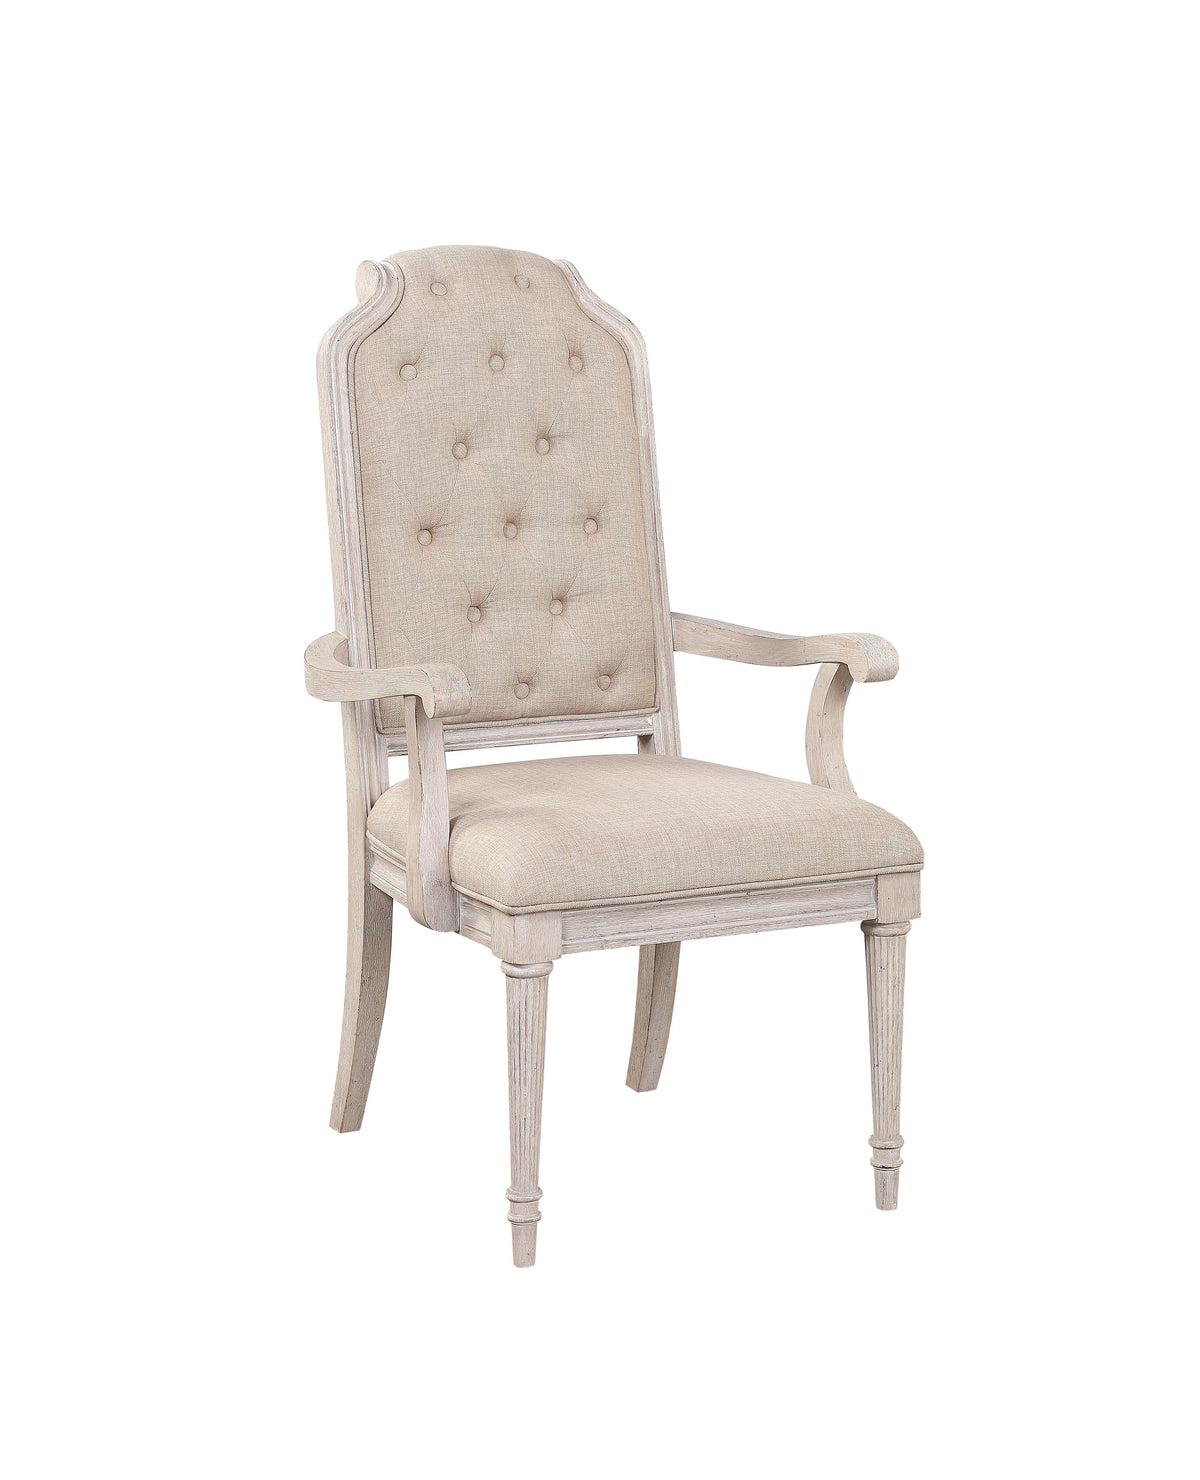 Wynsor Fabric & Antique Champagne Arm Chair  Las Vegas Furniture Stores